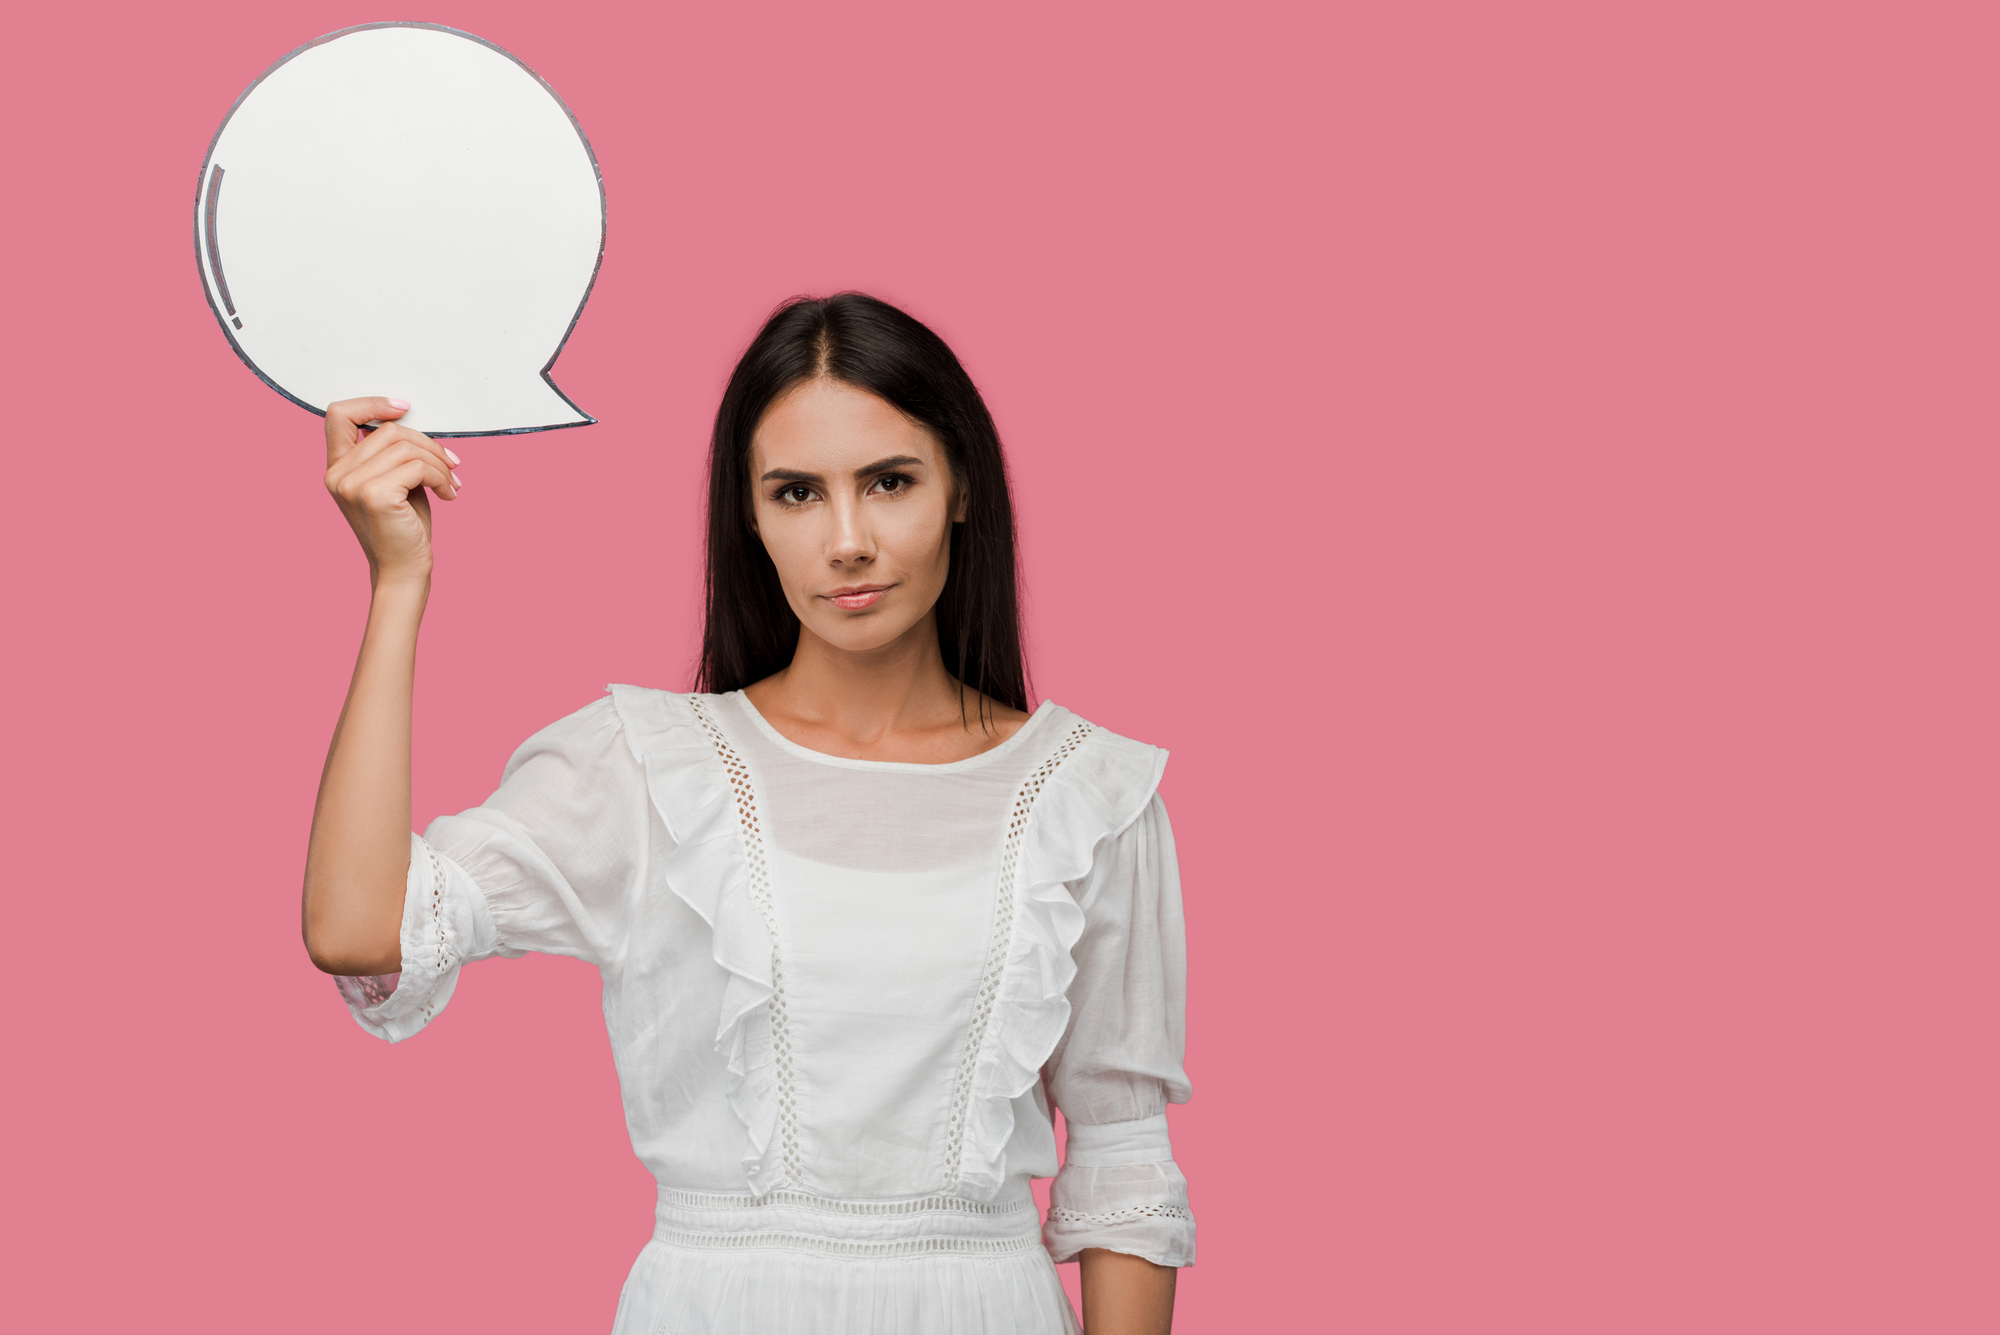 Young woman holding blank speech bubble isolated on pink